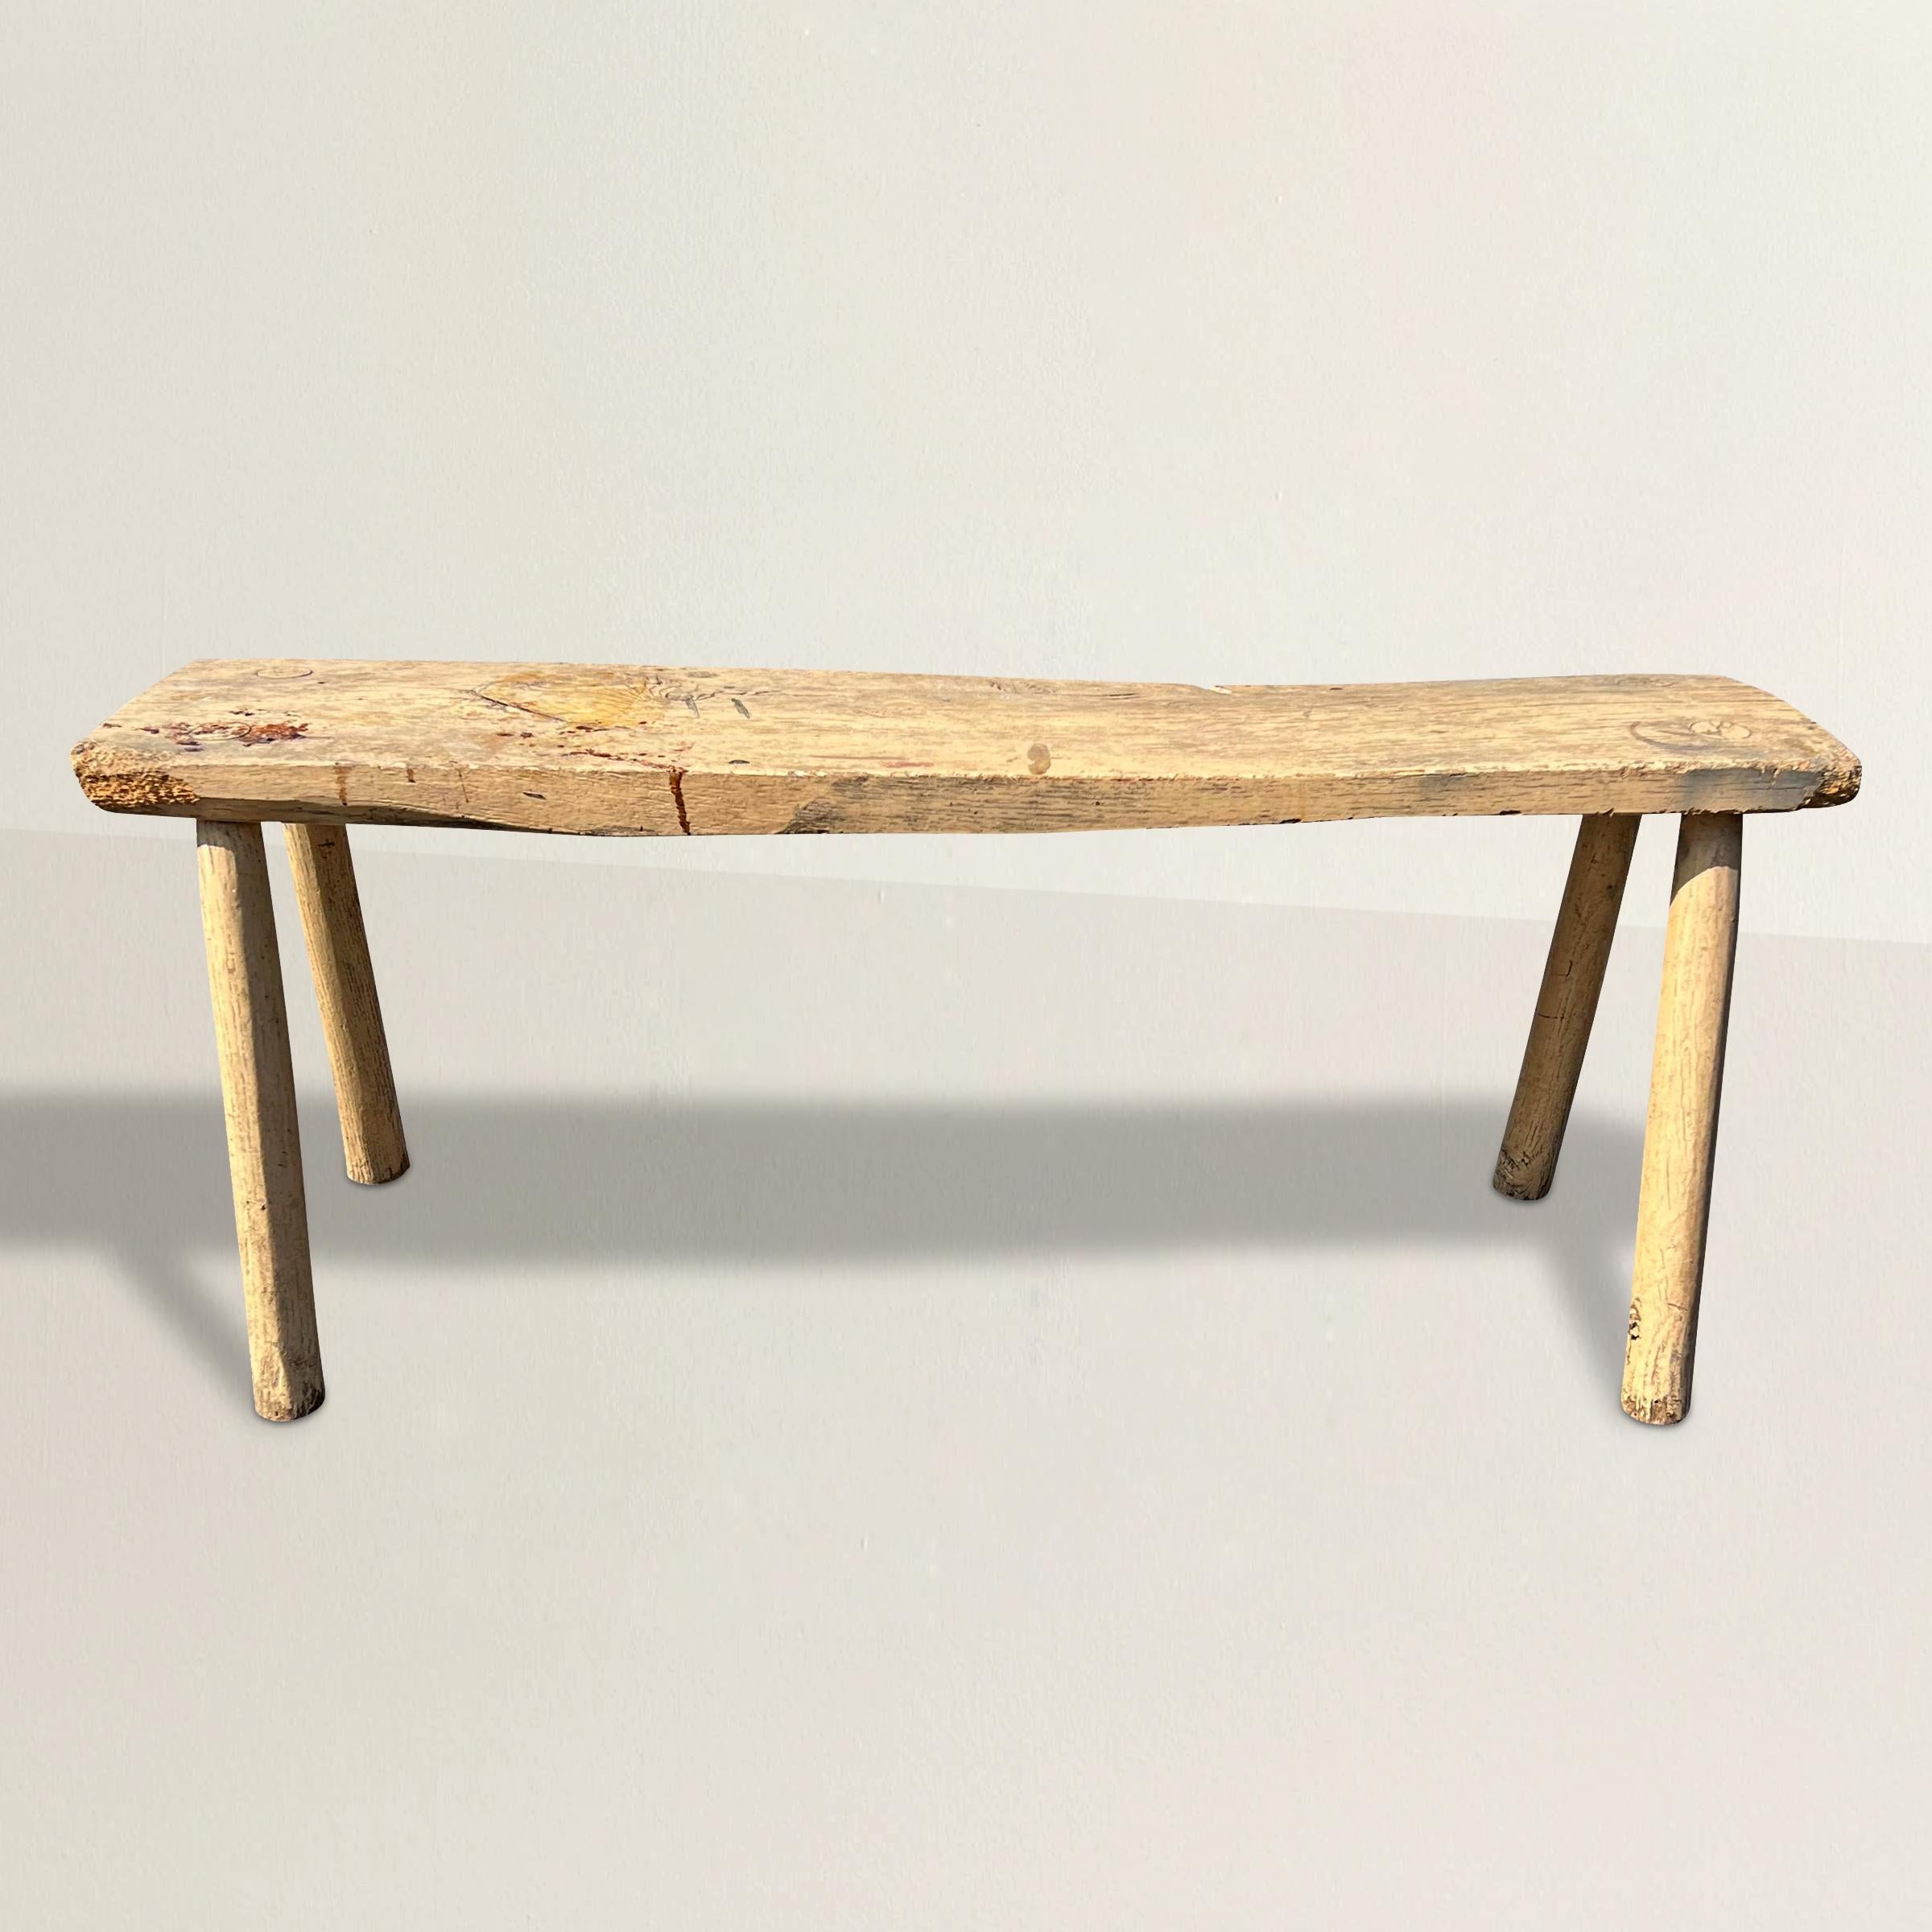 Transport yourself back to the 19th century with this charming American primitive bench, a testament to simplicity and functionality. Crafted with a minimalist design, it boasts four sturdy pegged legs that provide stability and durability. Its